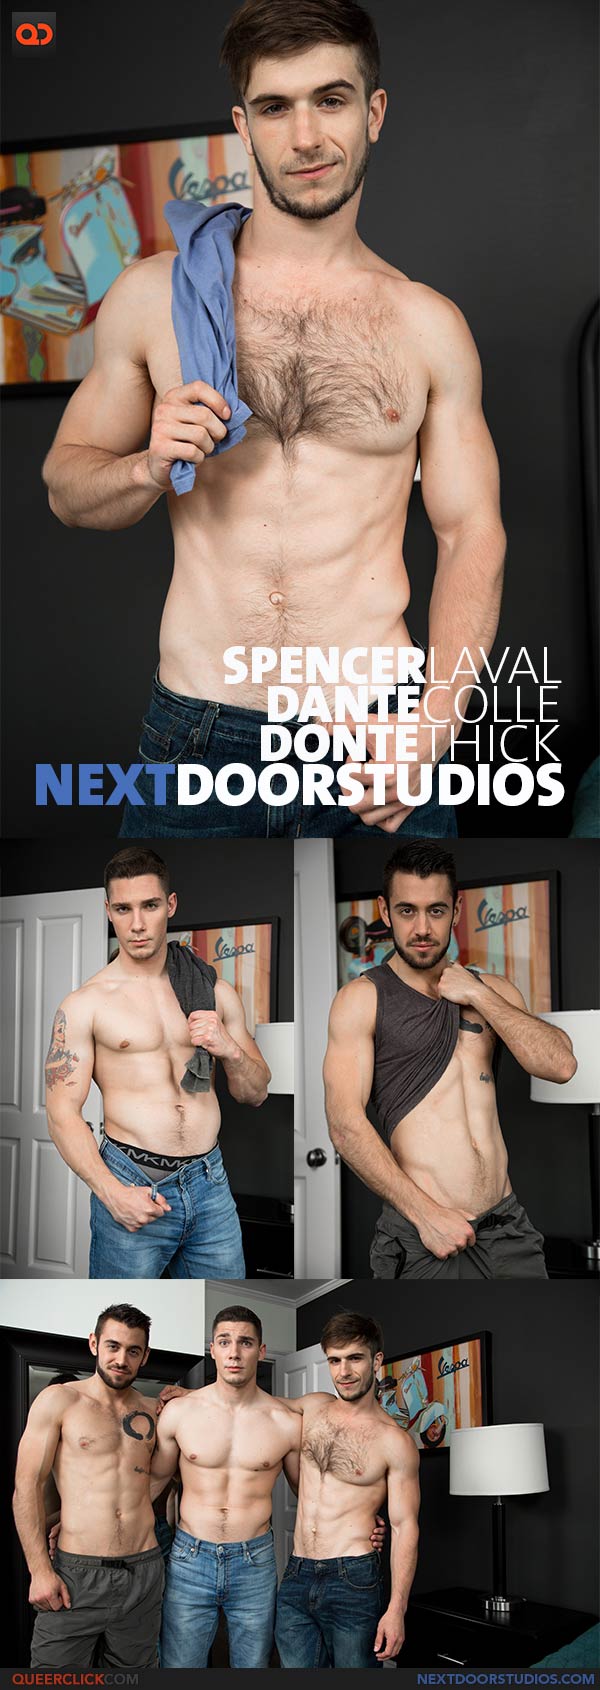 Next Door Studios:  Donte Thick, Spencer Laval and Dante Colle